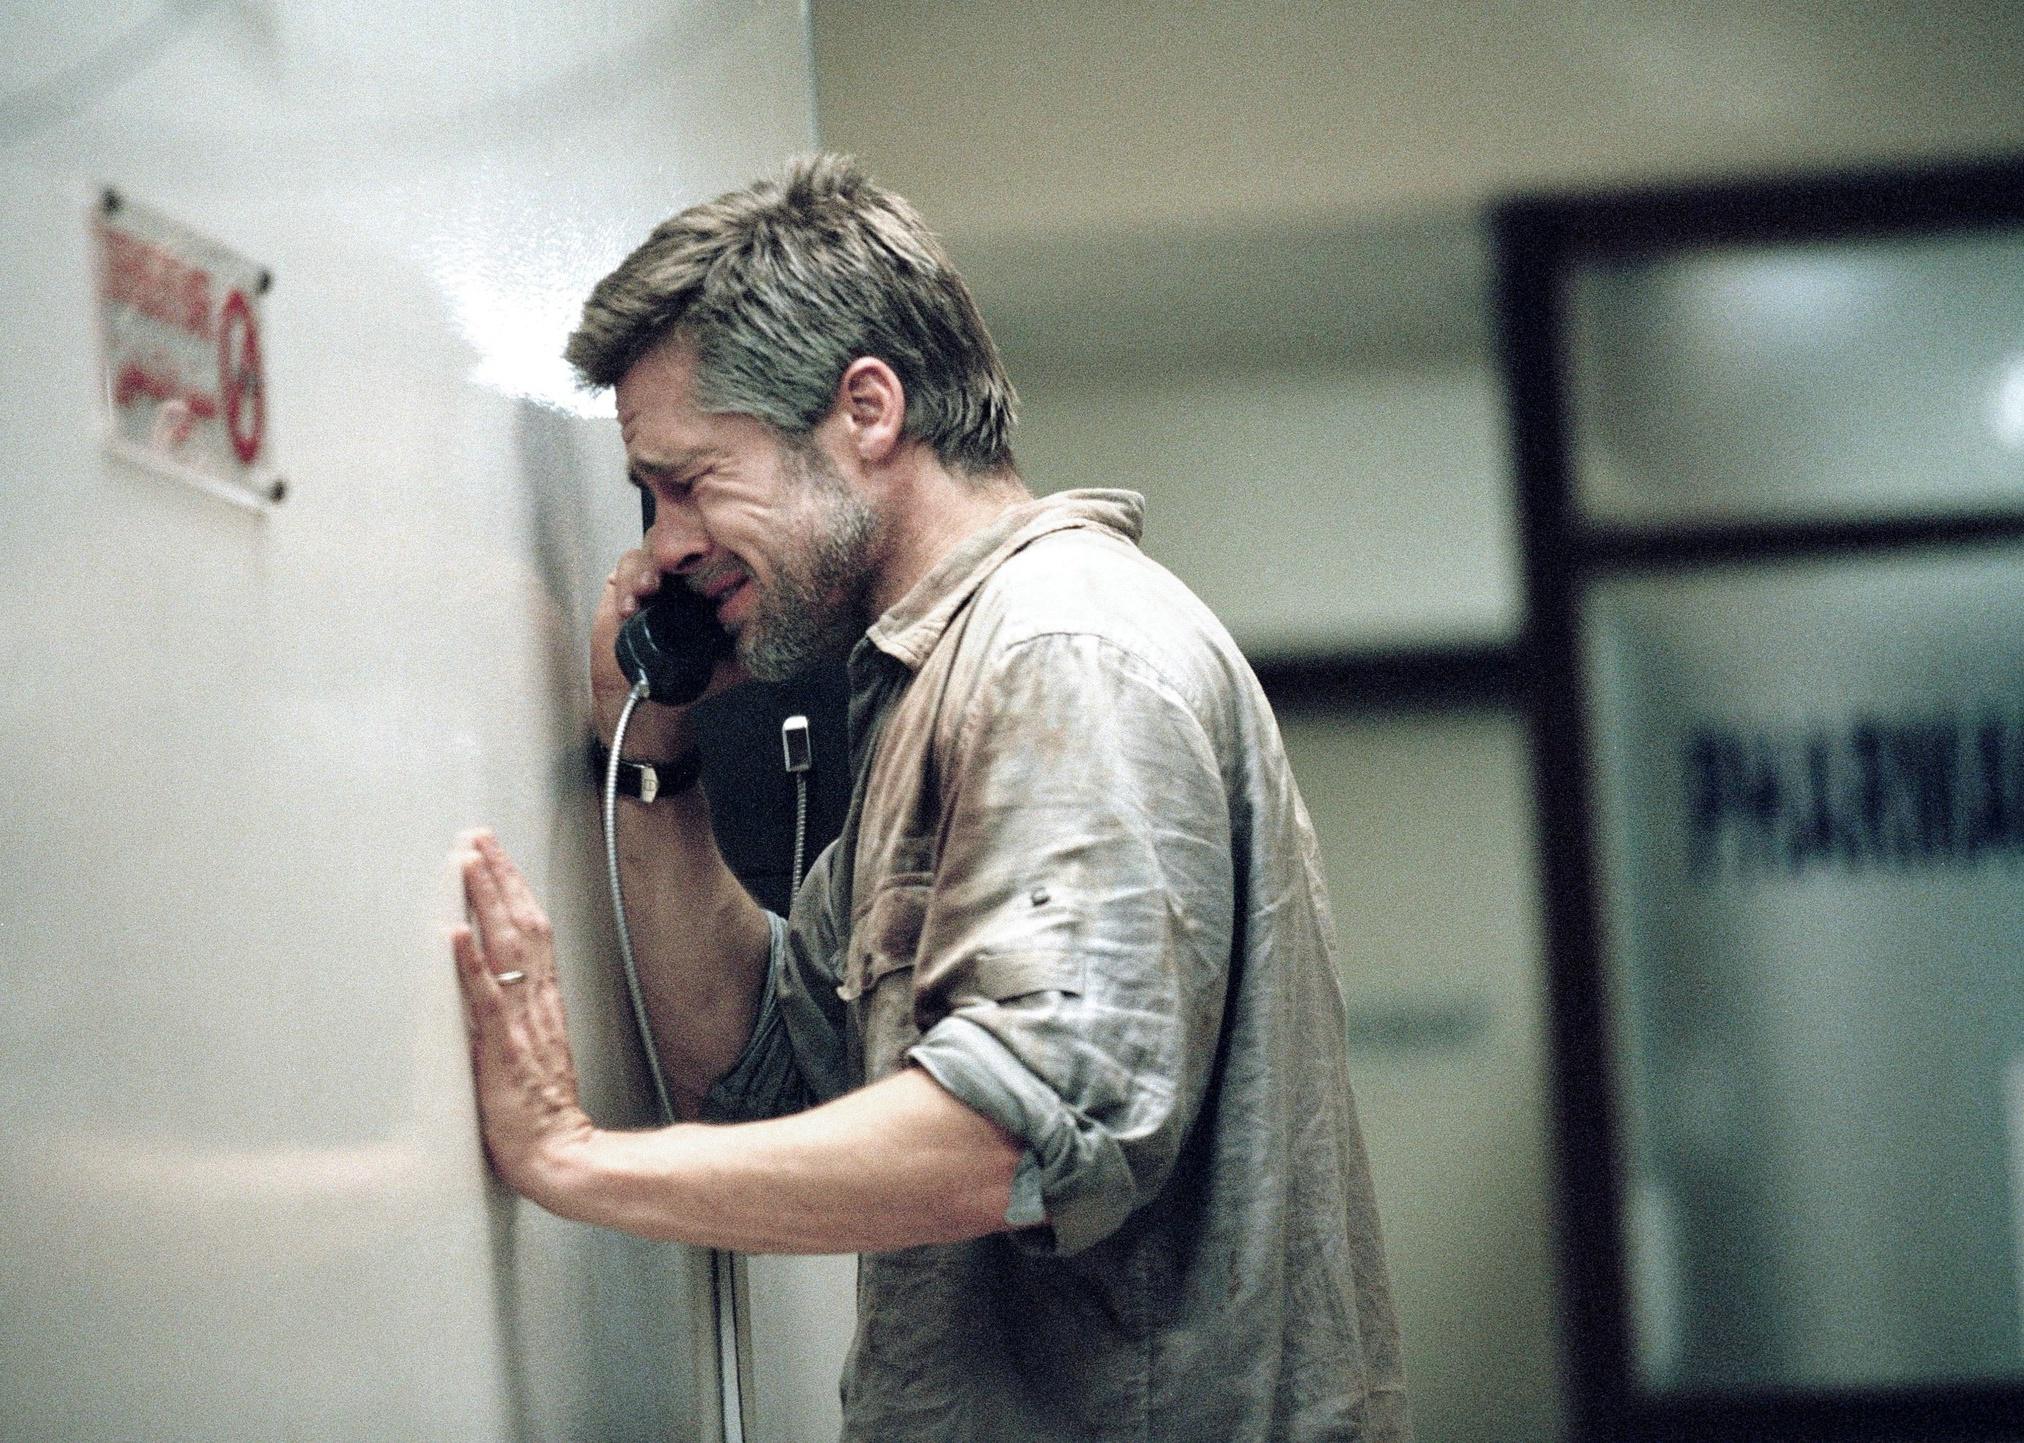 Brad Pitt on a payphone in a hallway crying against the wall.